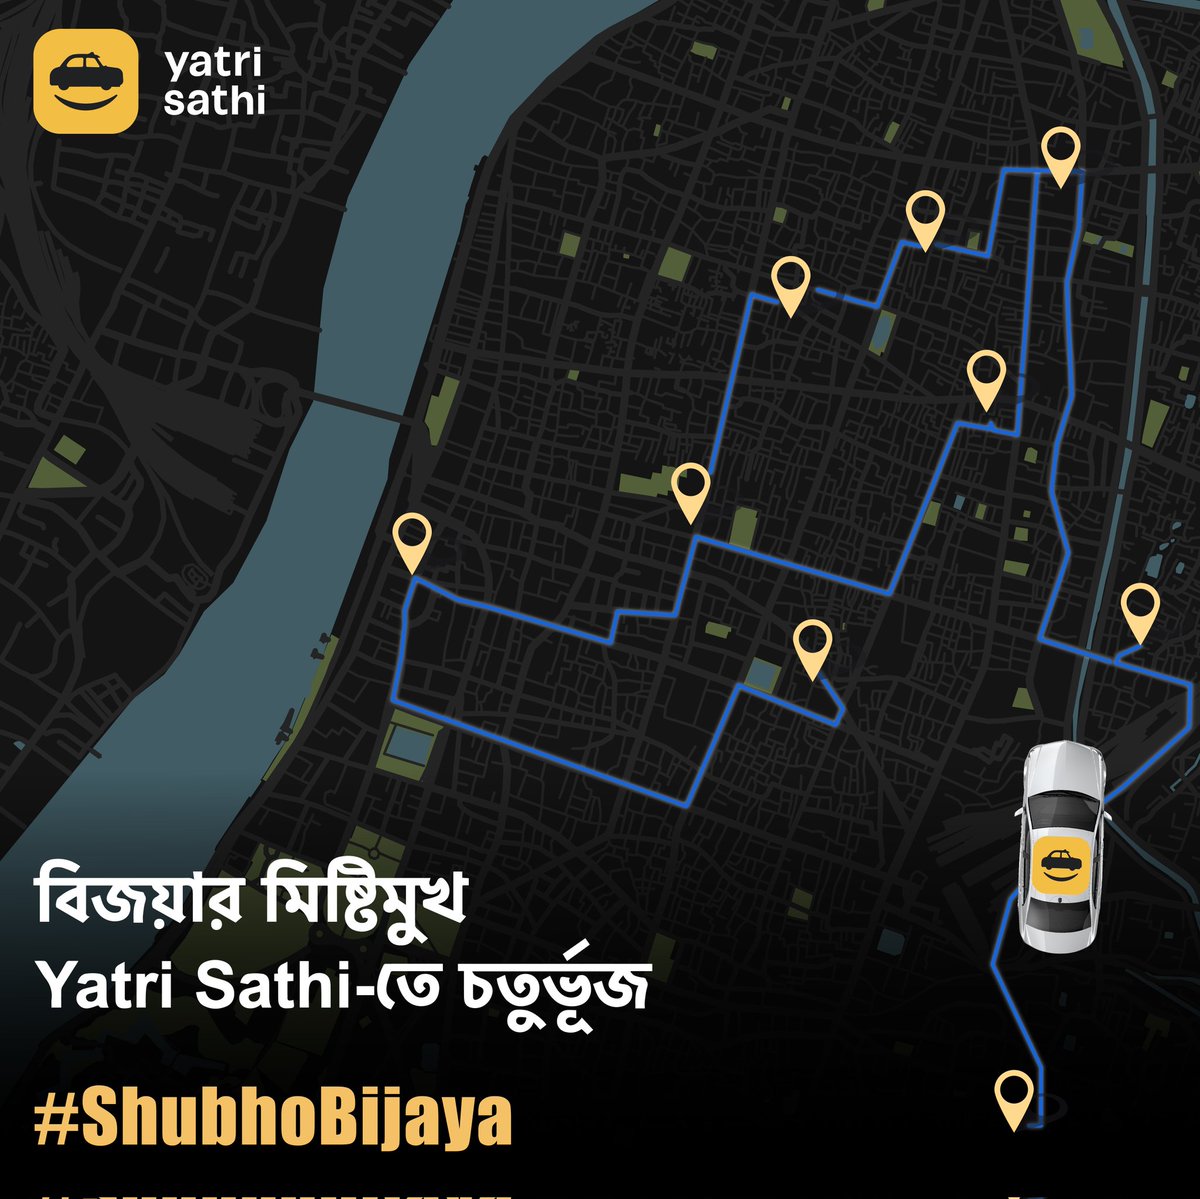 The only vaahan you need to celebrate mishtimukh with your near and dear ones, and especially your far ones. 

Book affordable rides anywhere in the city with Yatri Sathi! 📍

#AmarShohorAmarSofor #YatriSathi #ShubhoBijaya #DurgaPujo #Kolkata #MishtiMukh